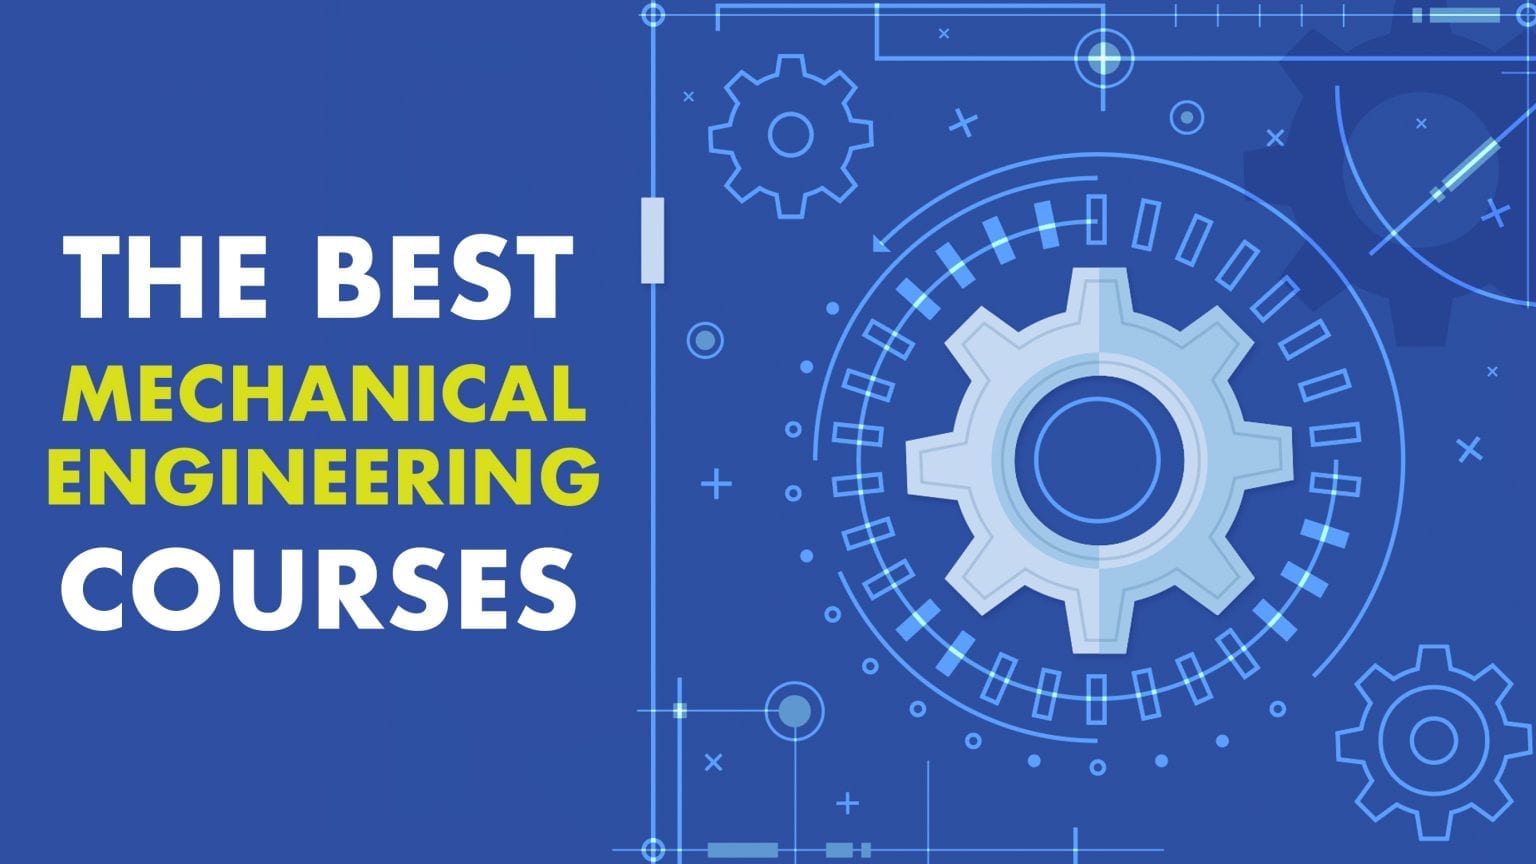 6 Best Electrical Engineering Courses, Classes and Trainings with